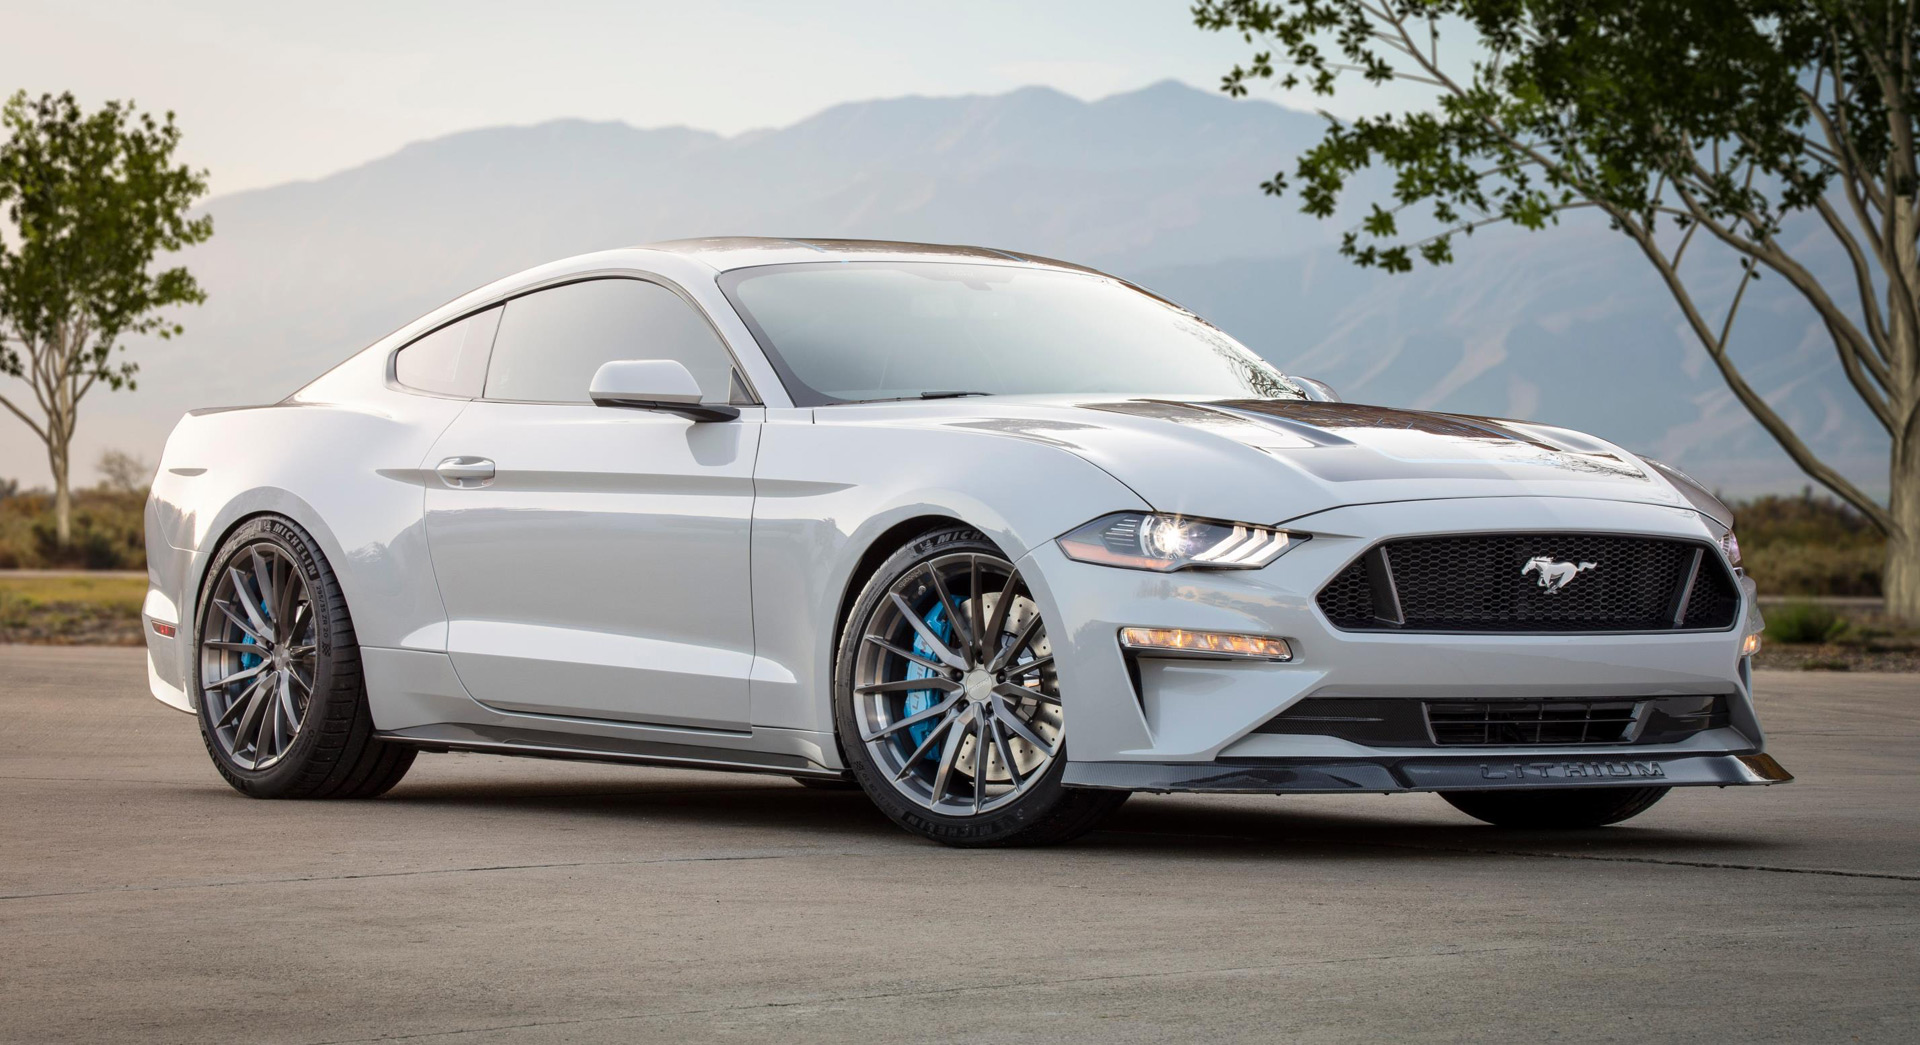 Mustang Of The Day: 2019 Lithium Mustang 